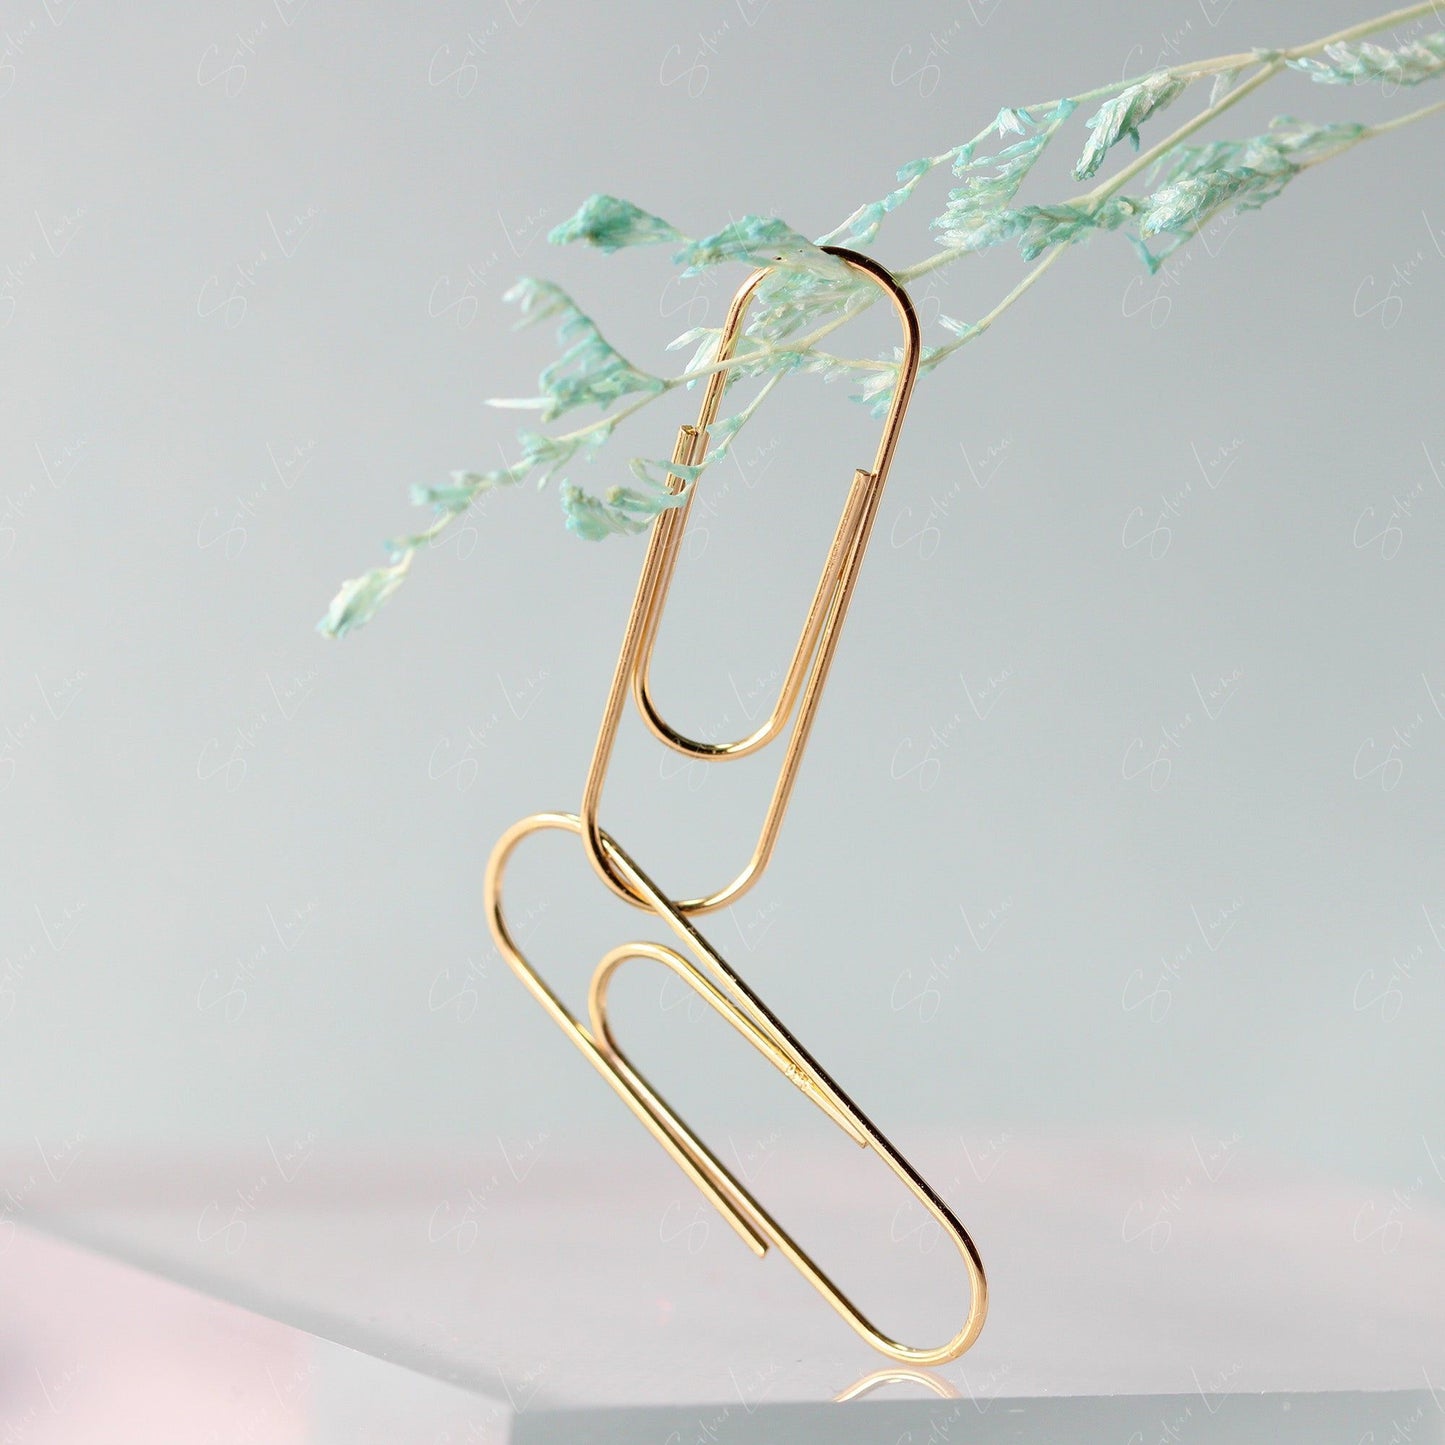 Unique Paper Clip Sterling Silver Earrings Gold